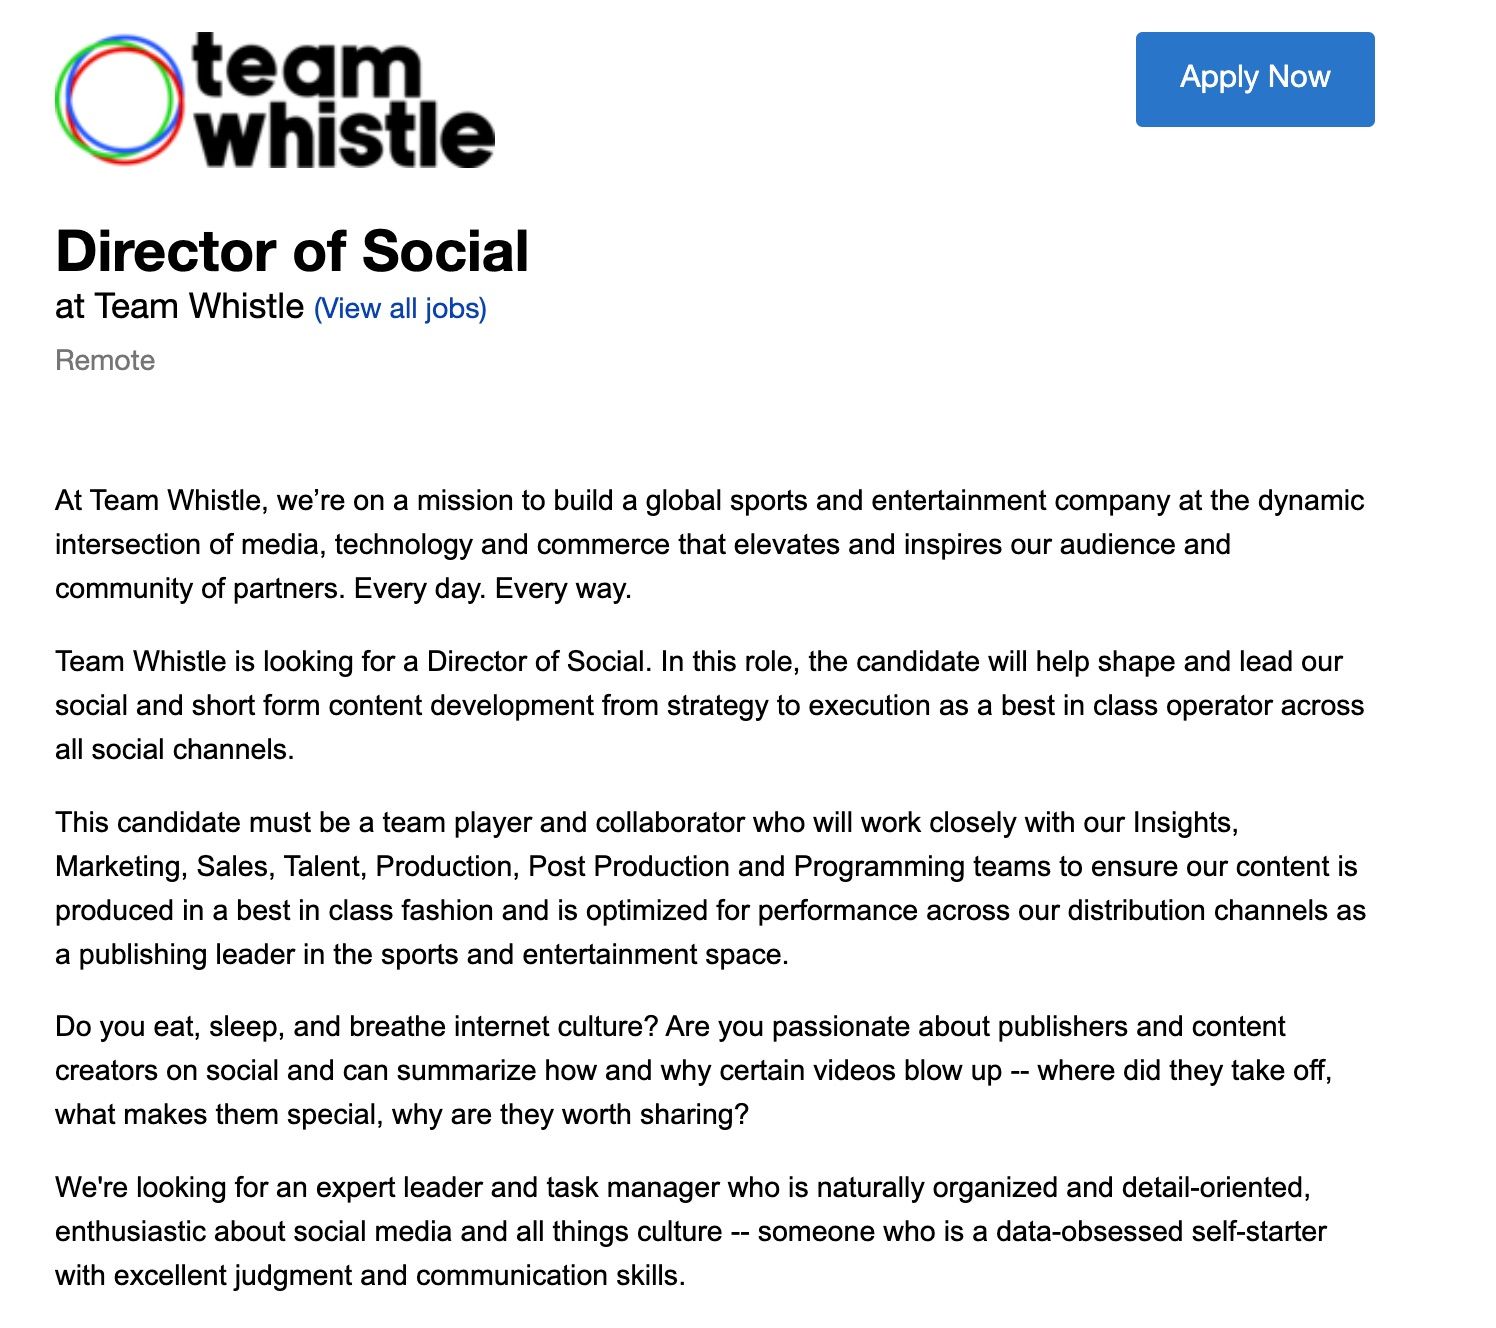 Job Application for Director of Social at Team Whistle - What You Need To Know About Building A Social Media Career